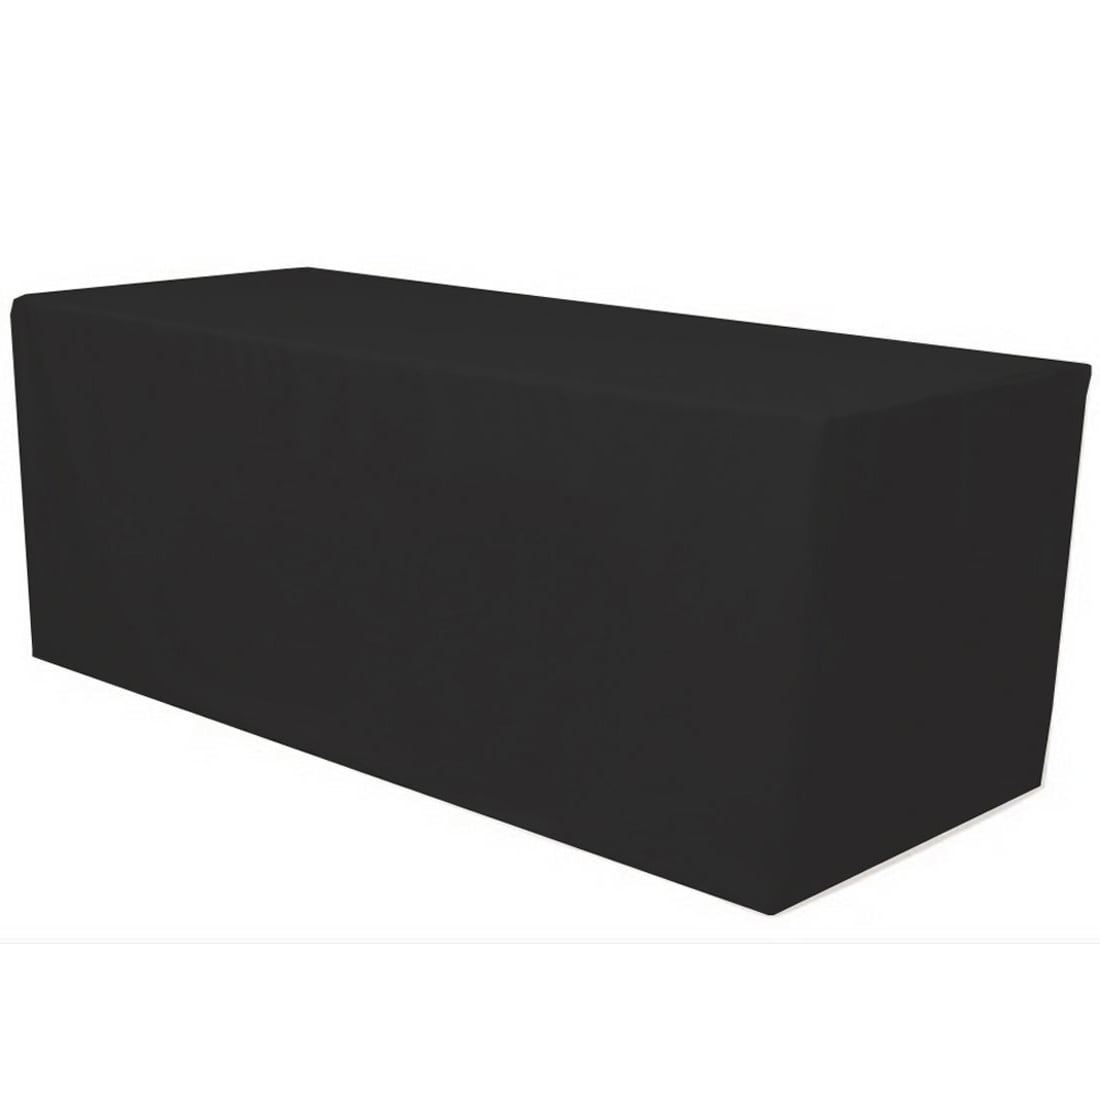 Tablecloth Market 6' Fitted Polyester Black Tablecloth for events for sale online 